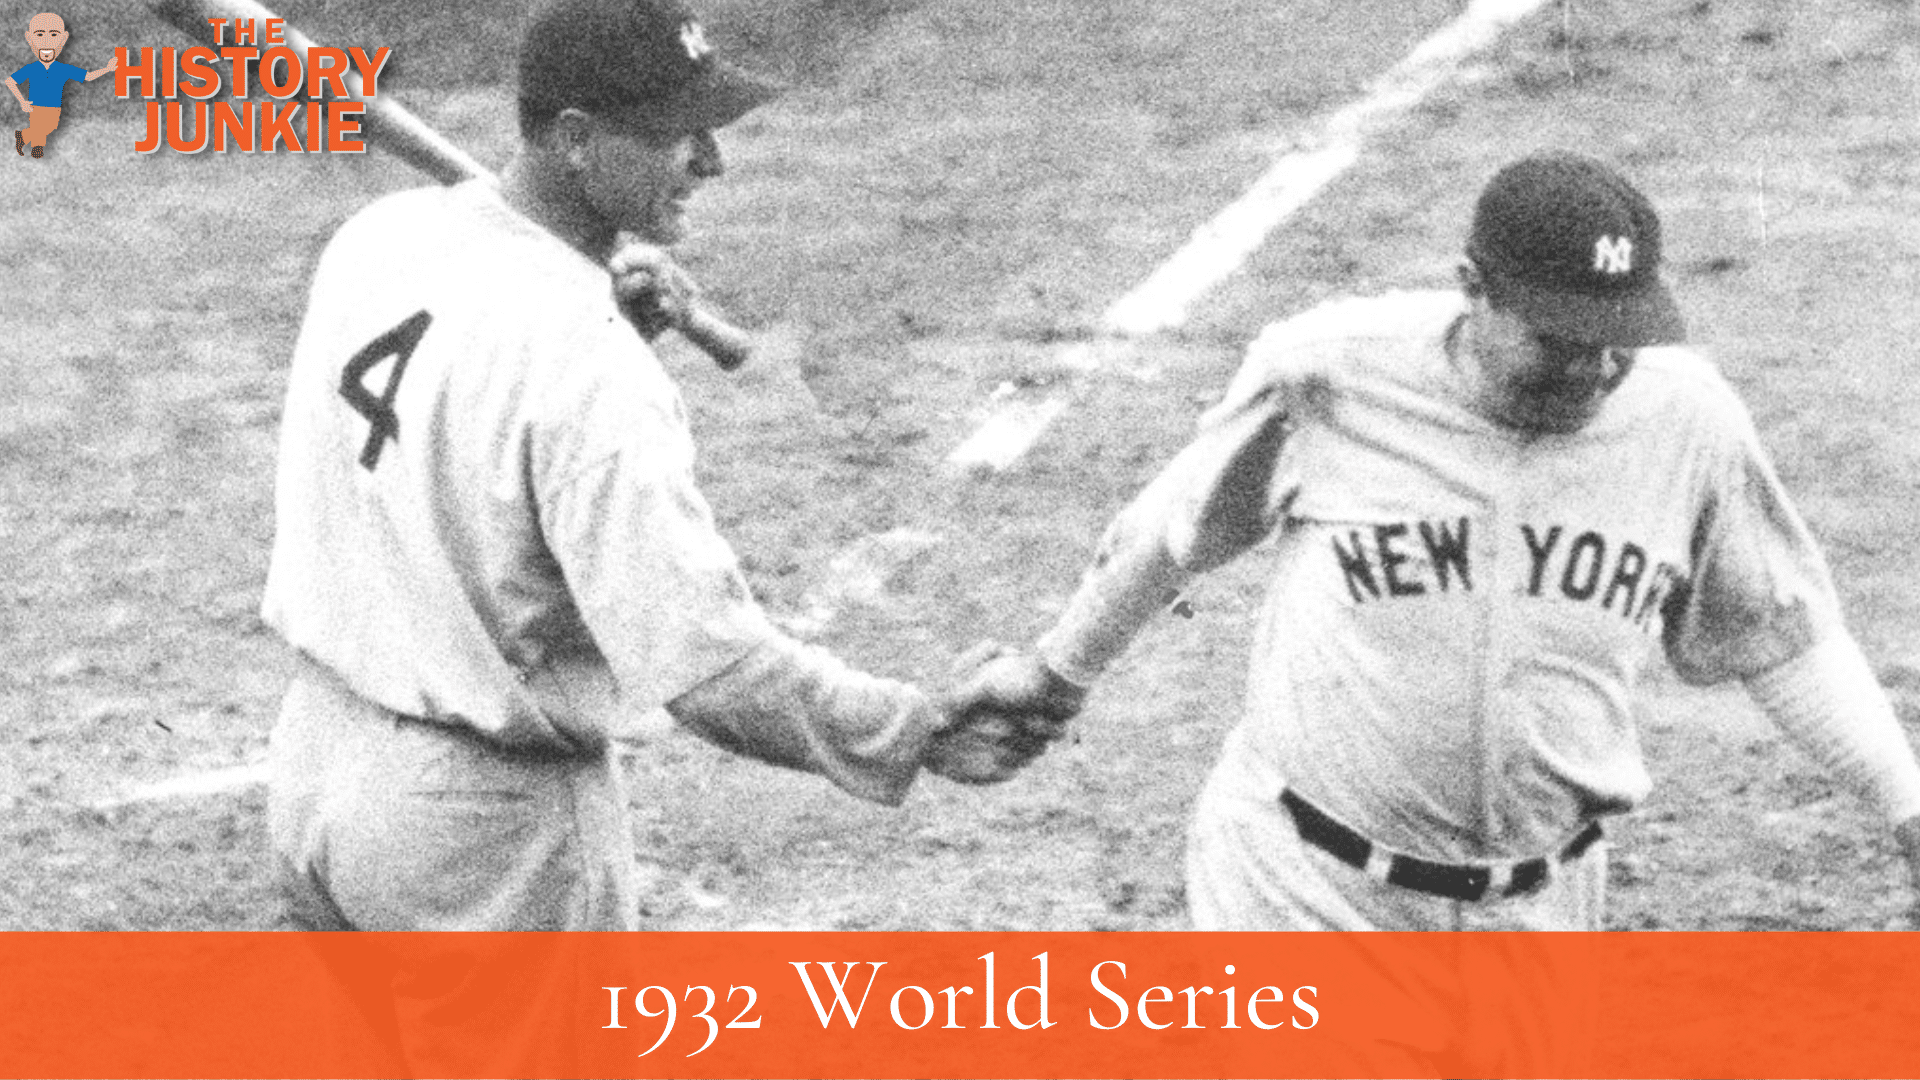 7 Interesting Facts About The 1932 World Series - The History Junkie